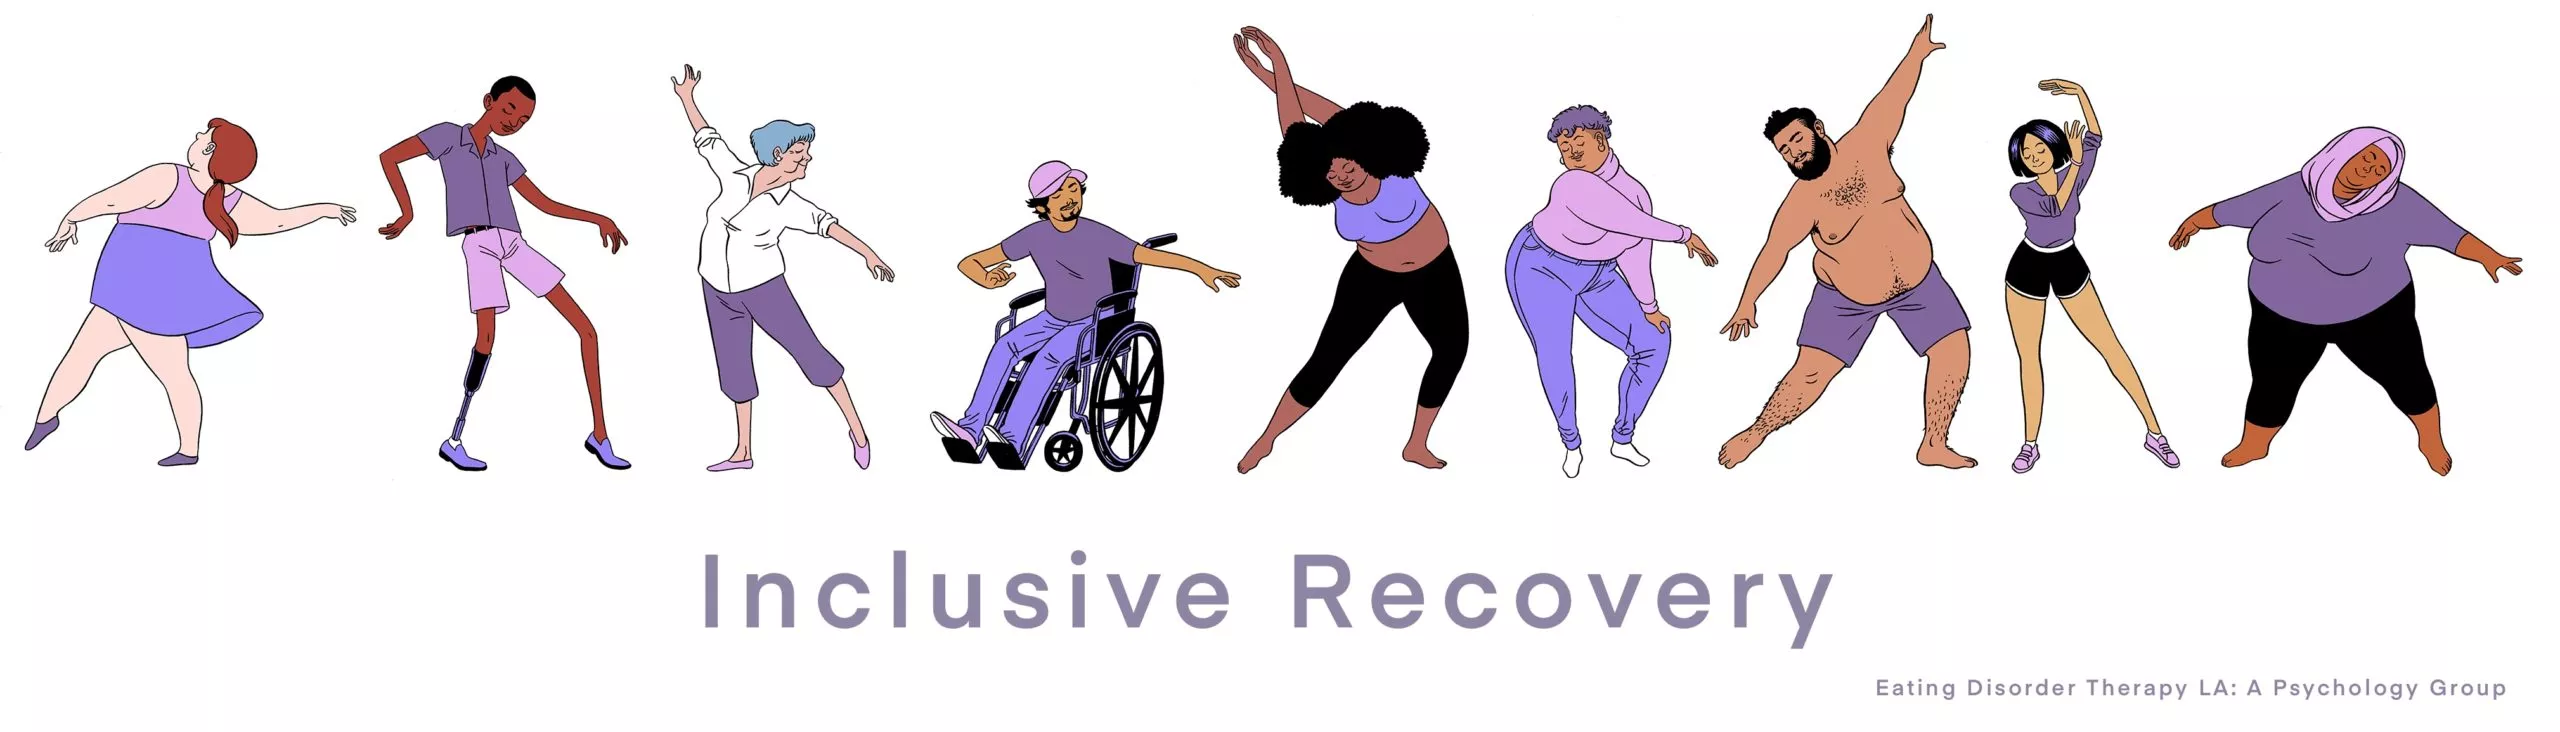 Illustrated image of multiple dancers of various body shapes, sizes and abilities with the text "Inclusive Recovery" underneath. Anorexia Nervosa, Bulimia Nervosa, and ARFID Treatment in Los Angeles, CA and online anorexia nervosa treatment throughout the state of California including Modesto, Bakersfield, Napa, Palm Springs, and beyond! Learn more about anorexia treatment, including atypical anorexia as well, here.